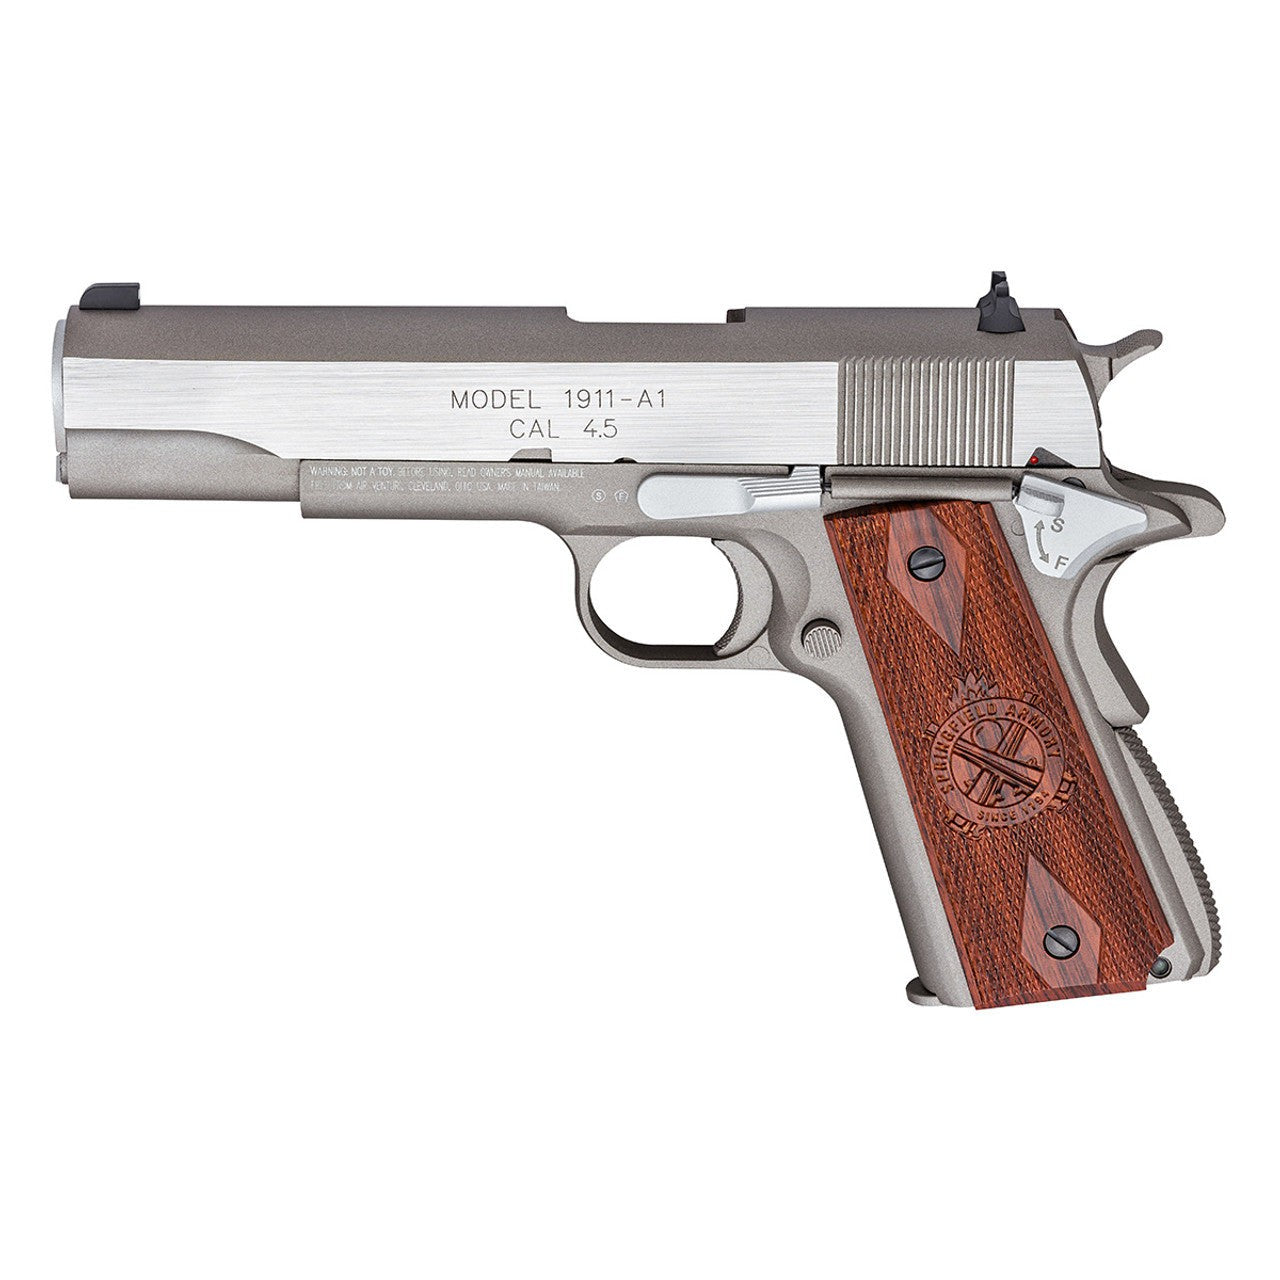 SPRINGFIELD ARMORY 1911 MIL-SPEC STAINLESS CO2 BLOWBACK AIR PISTOL – LIMITED EDITION